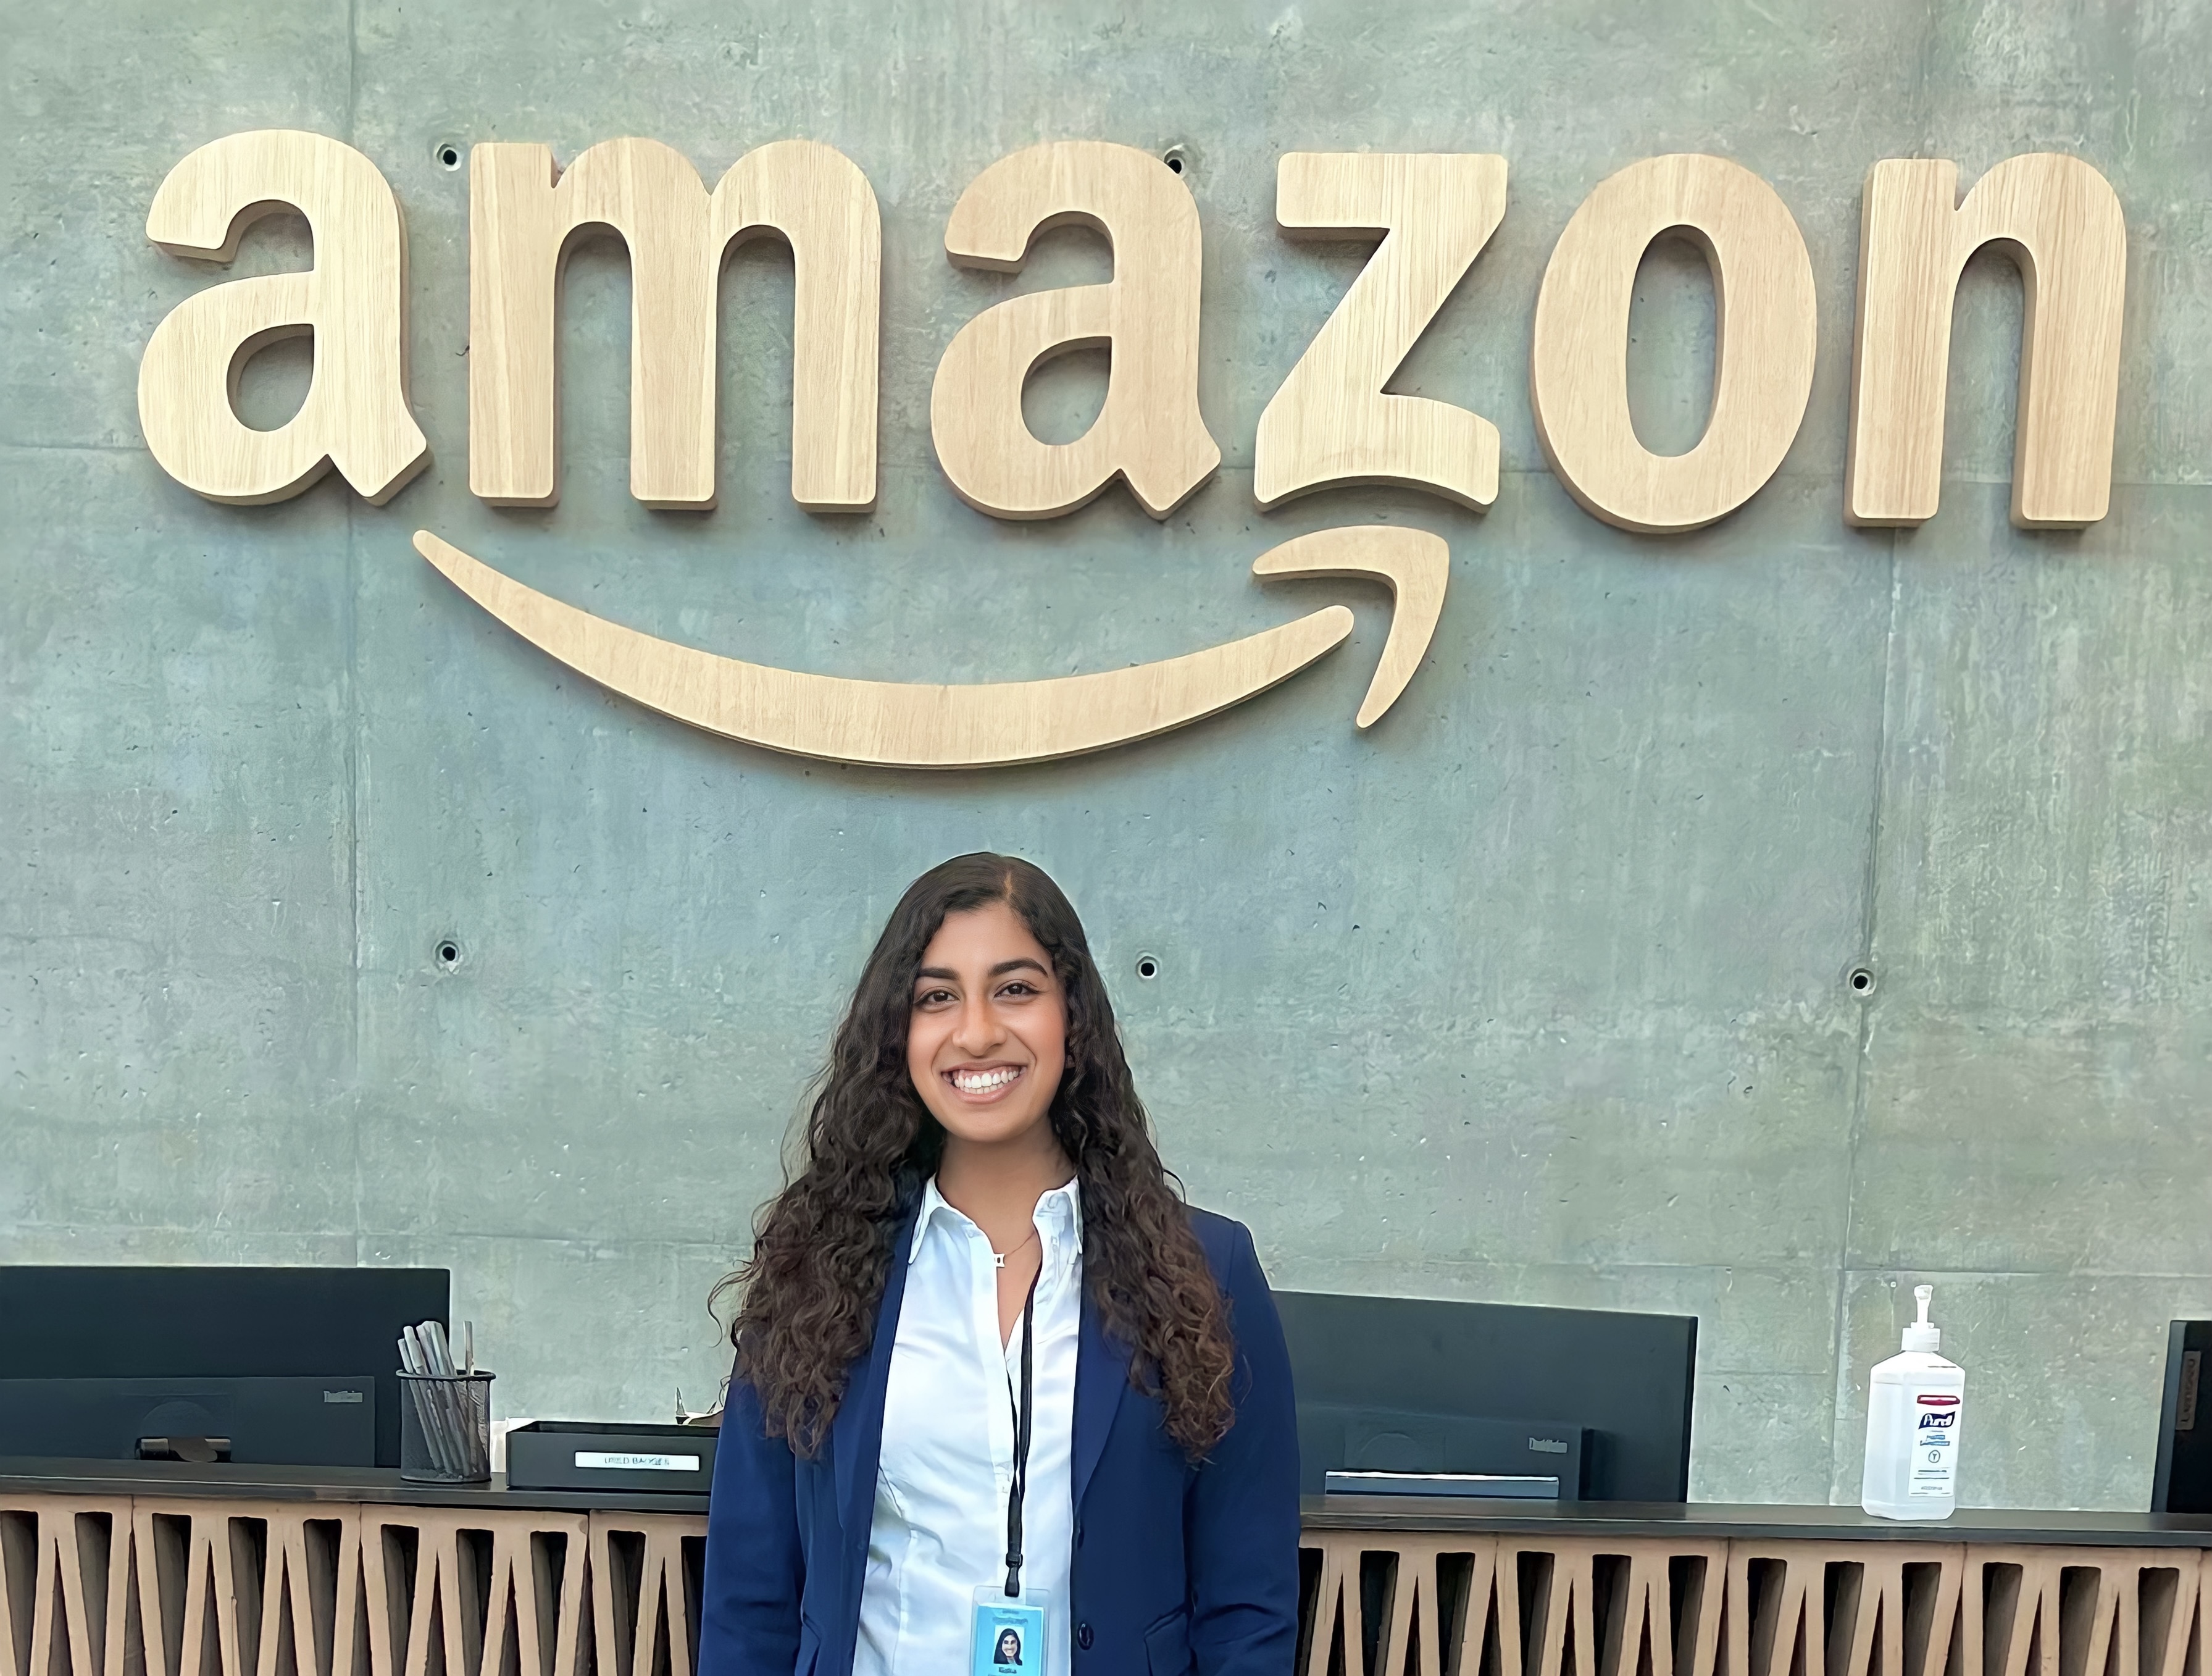 Driven by passion for technology, computer science student lands internship at Amazon – News